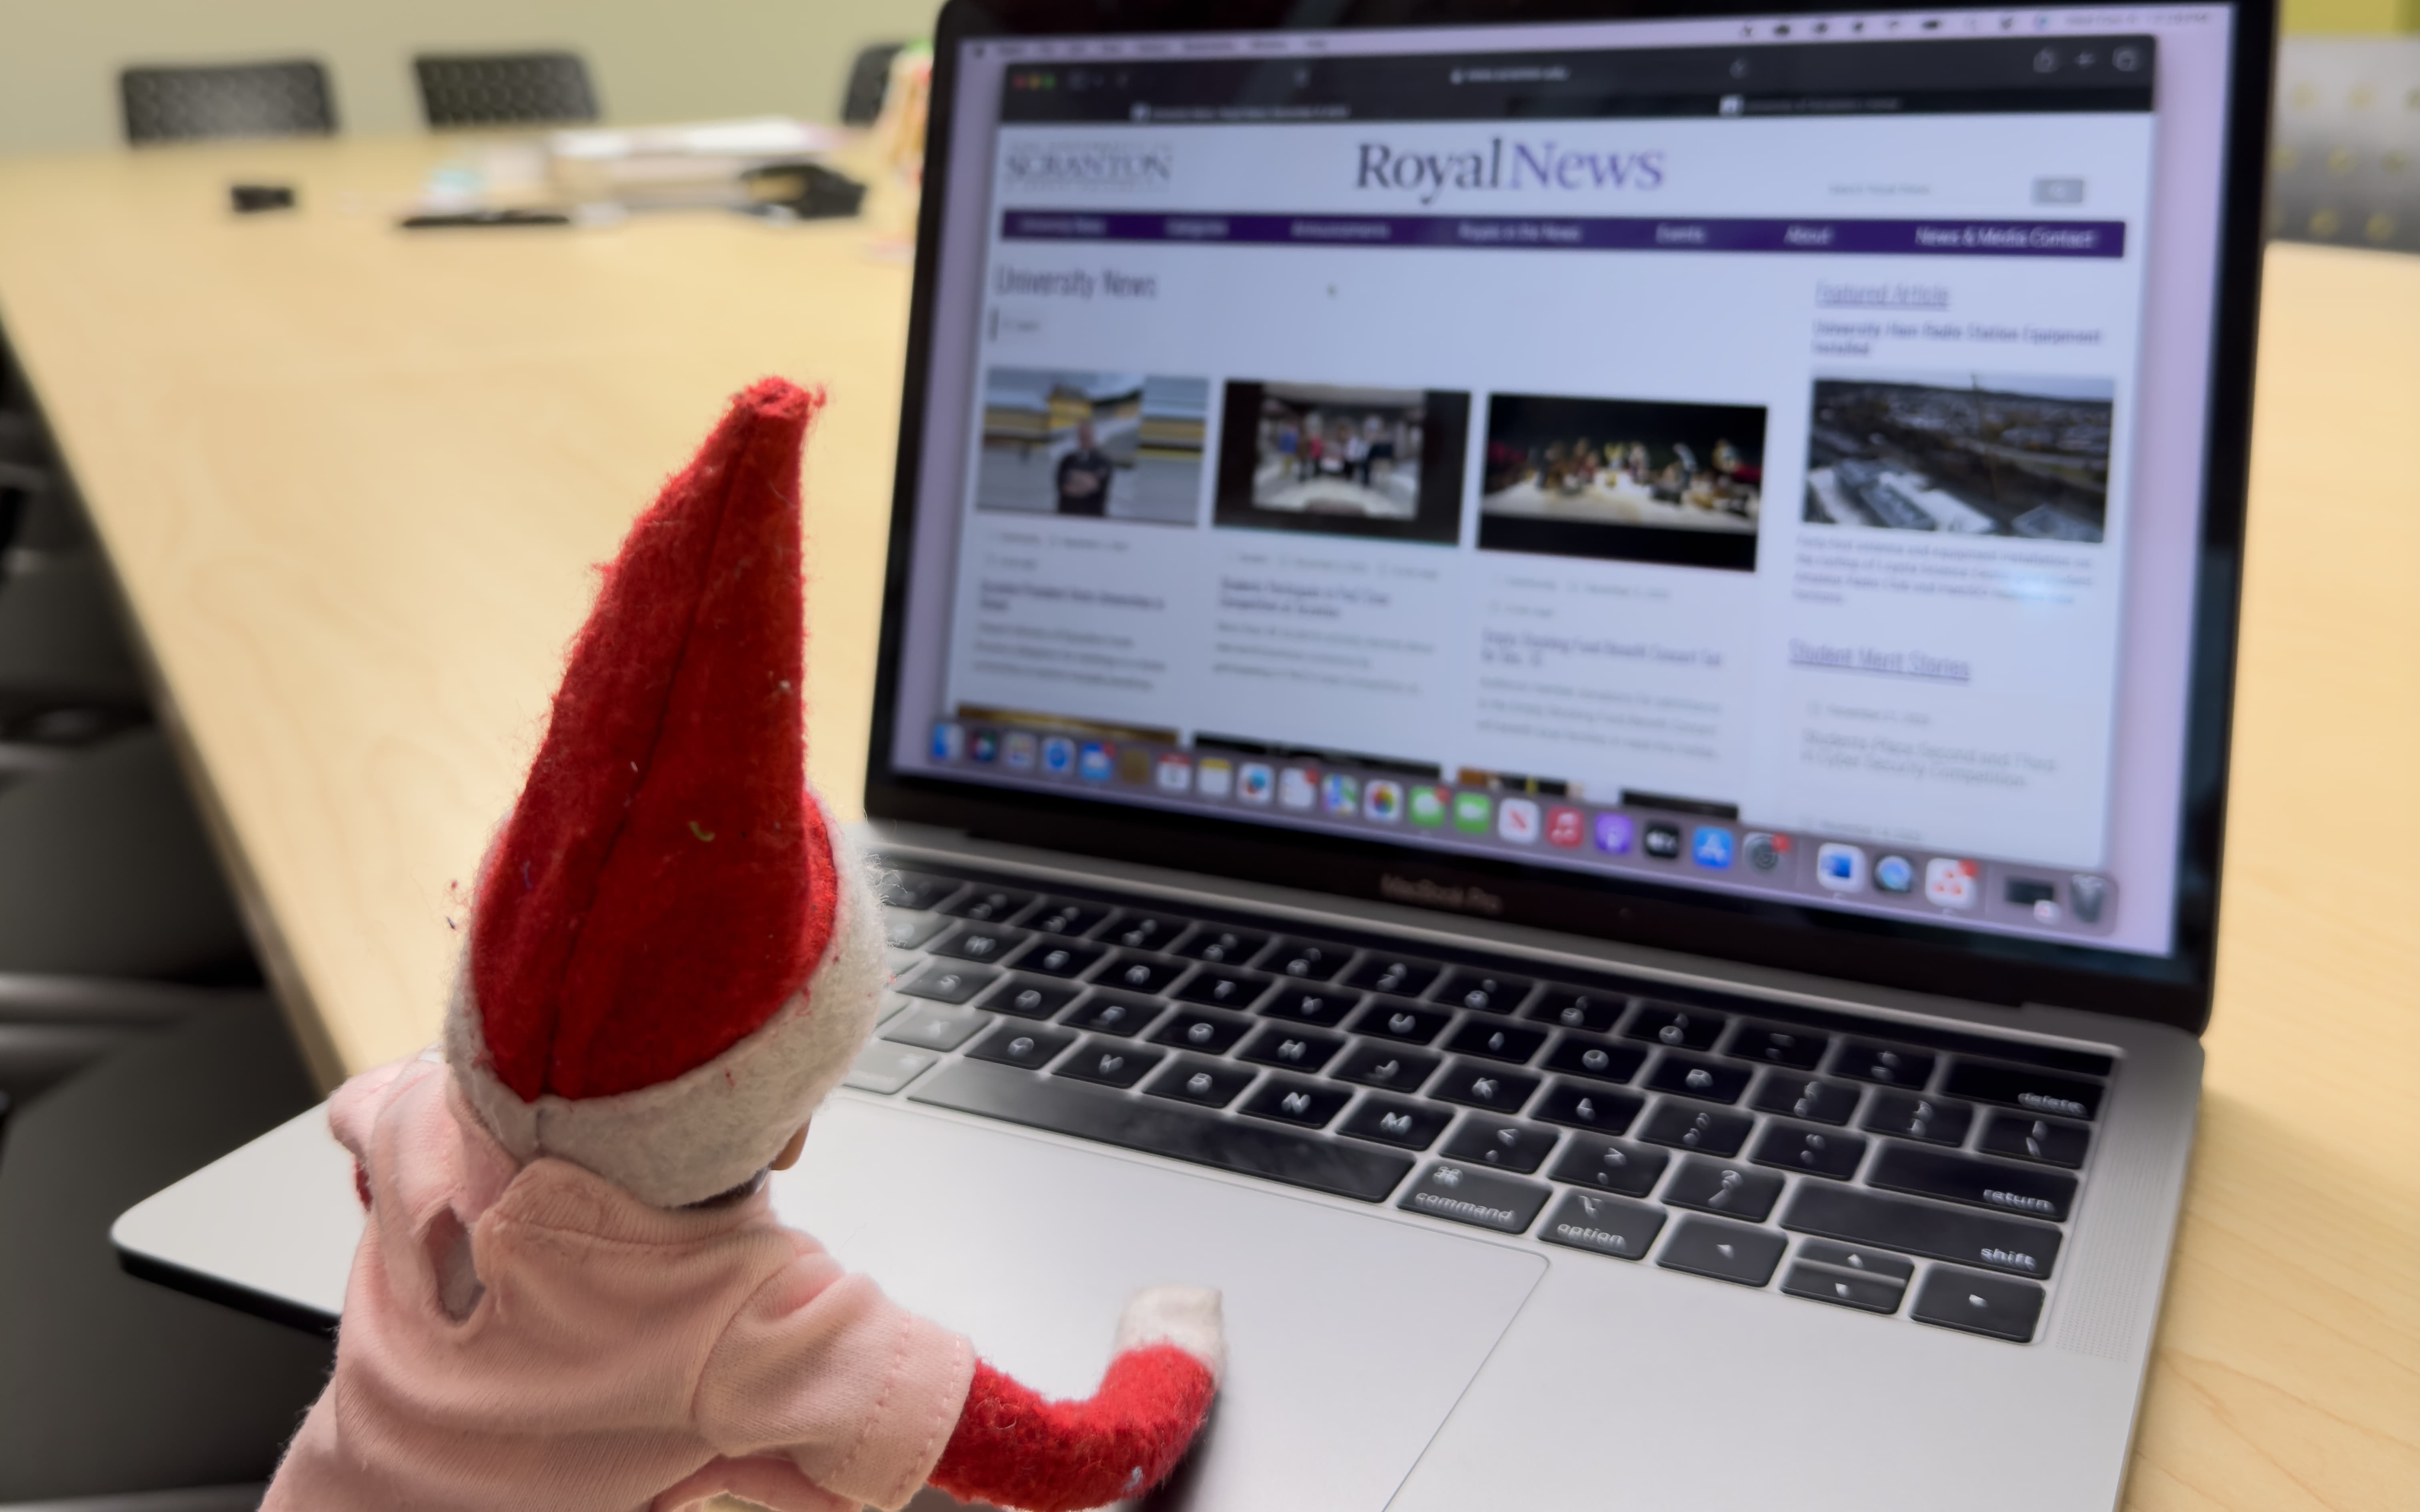 toy elf in holiday clothing sitting at a laptop with Royal News on its screen